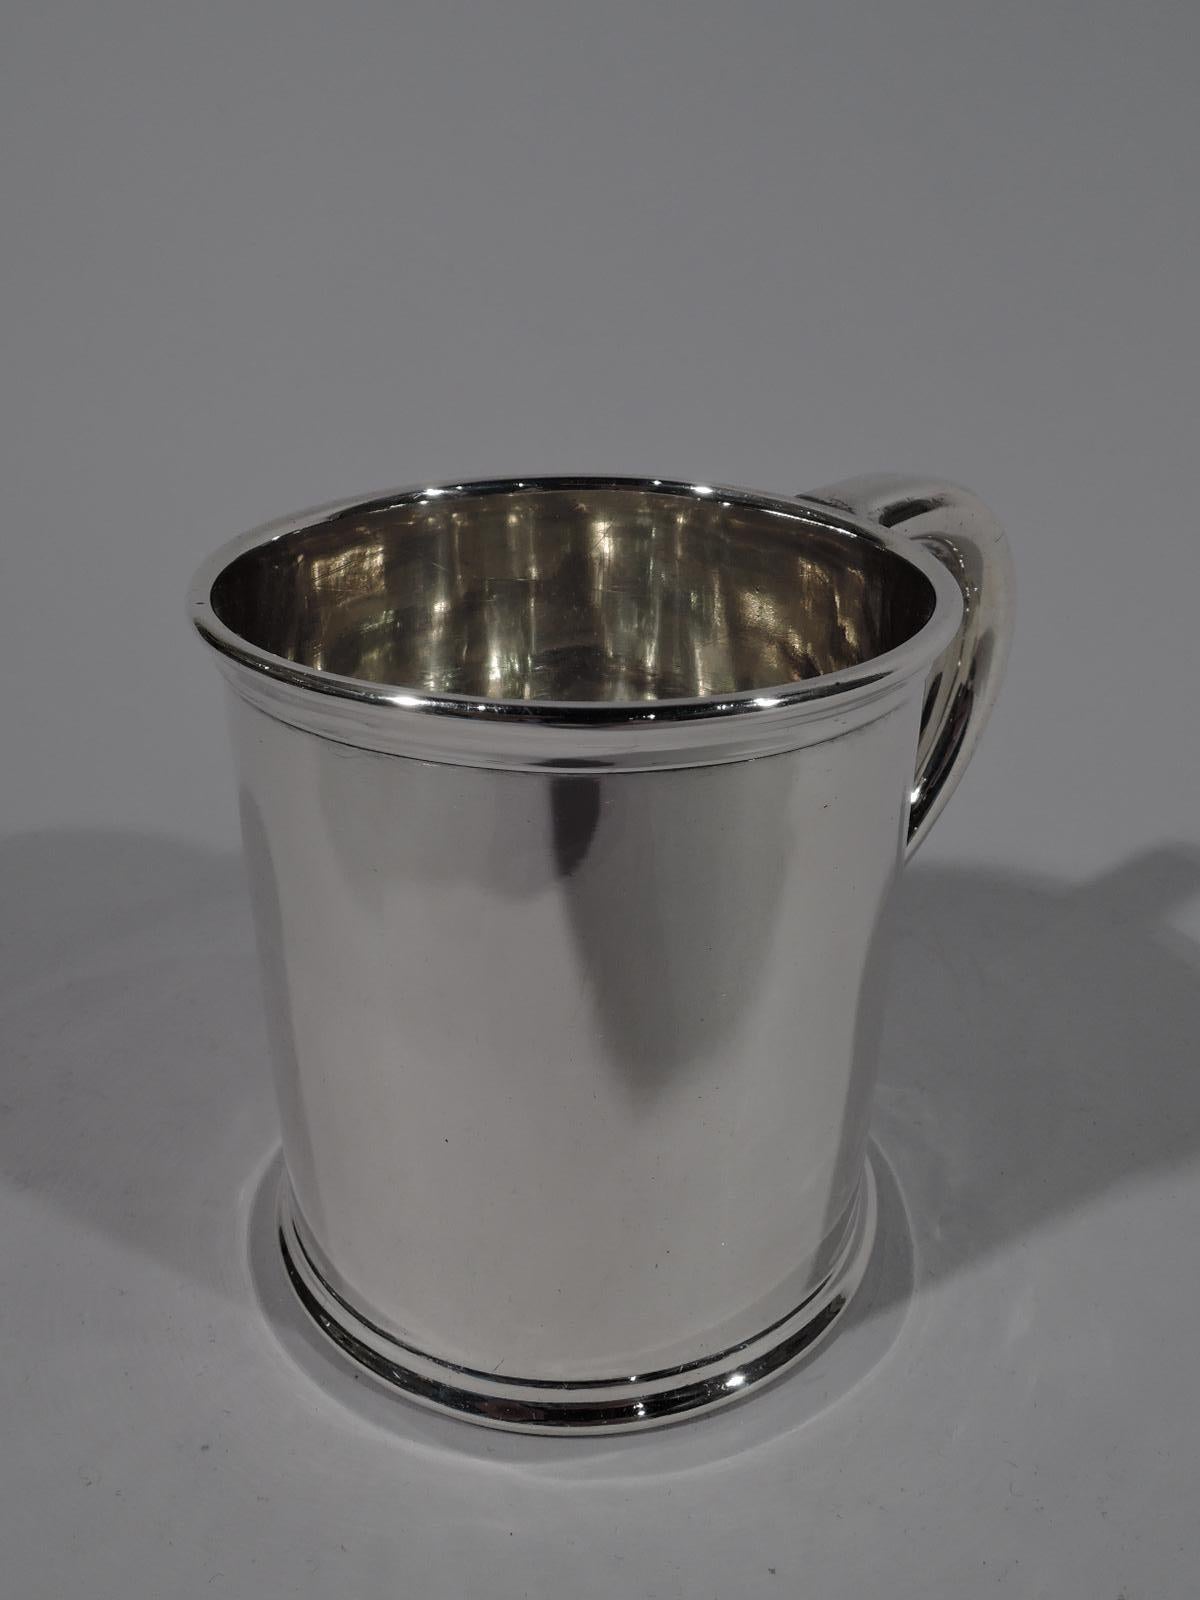 Edwardian sterling silver baby cup. Retailed by JE Caldwell in Philadelphia, circa 1910. Straight sides, molded rim and base, and C-scroll handle. Lots of room for engraving. Fully marked including retailer’s stamp and no. 863. Weight: 3 troy ounces.